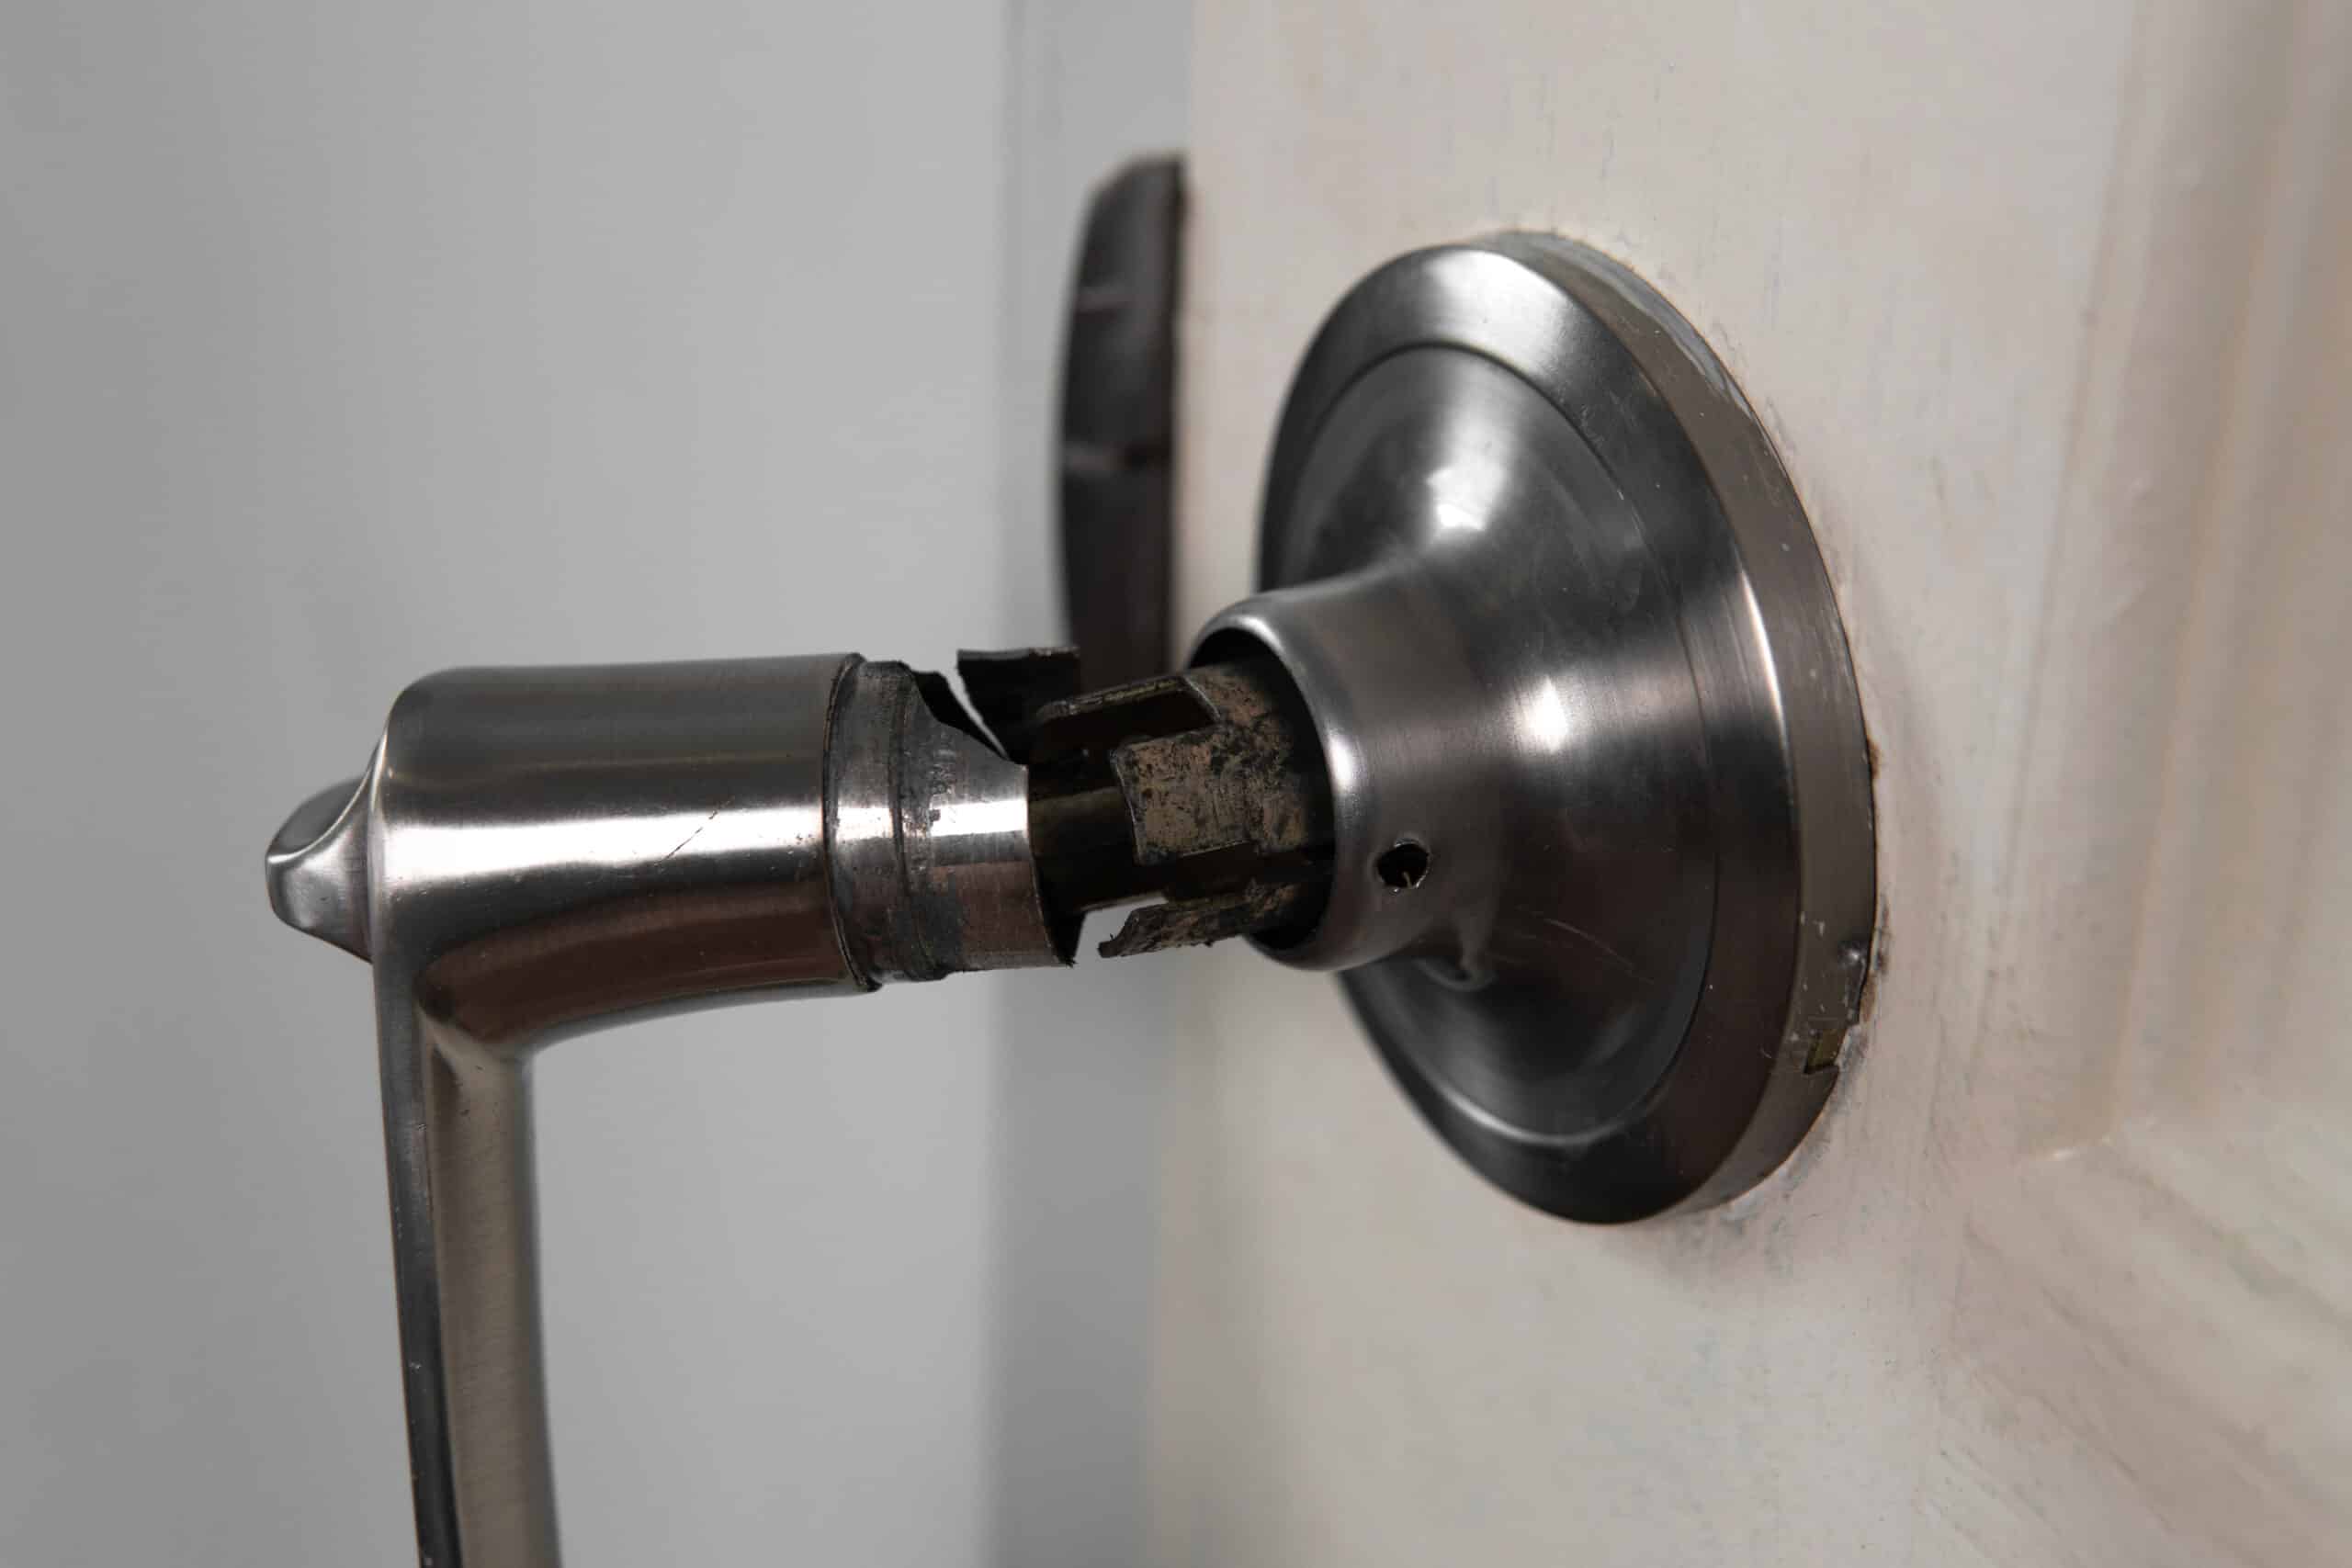 Lock in peace of mind: Maximise home security after a burglary in Portslade